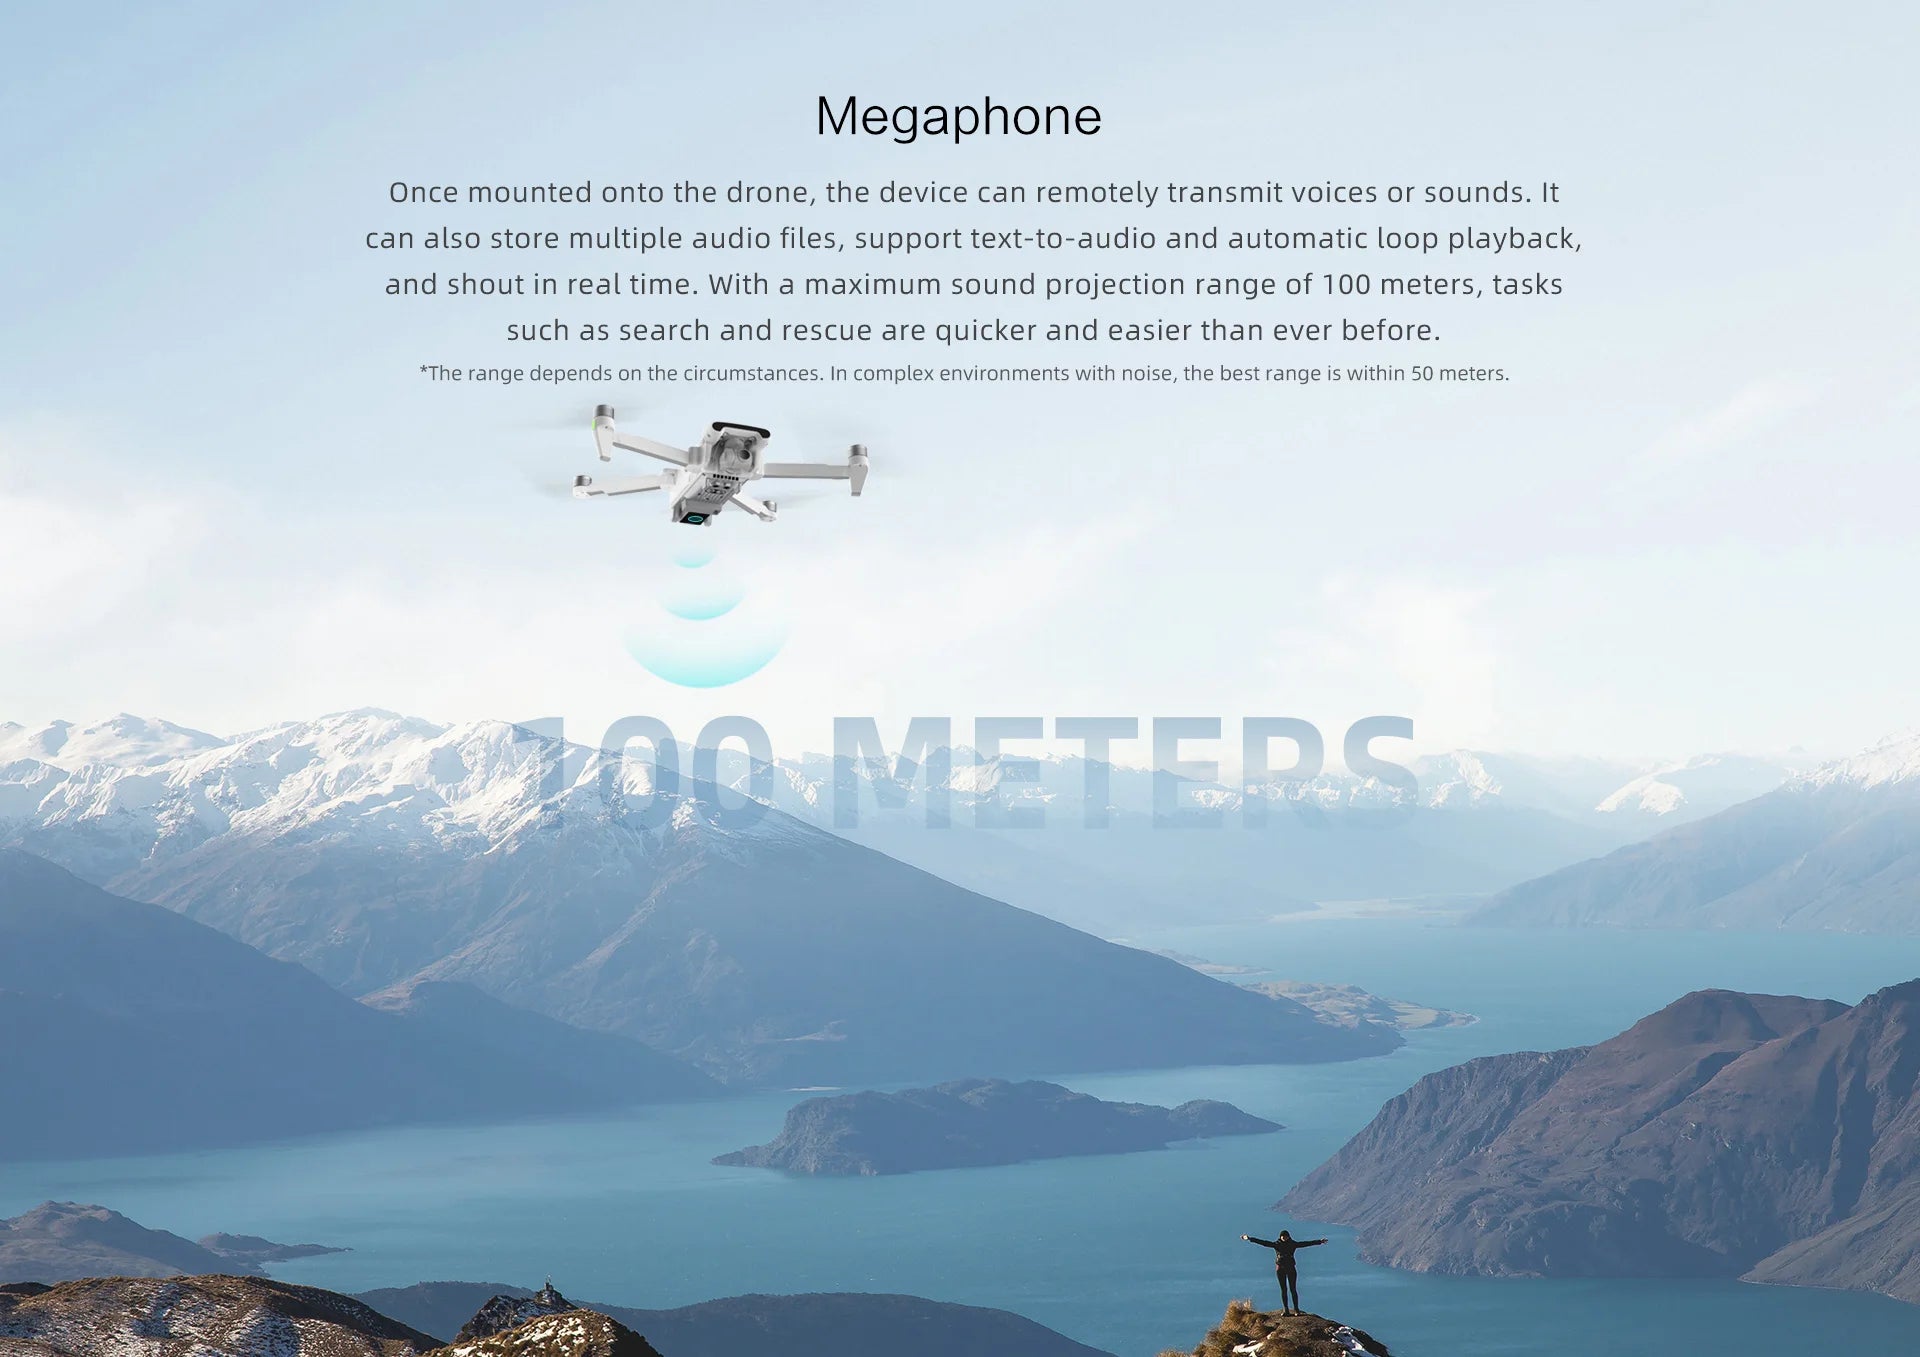 FIMI x8se 2022 V2 Camera Drone, the drone has a maximum sound projection range of 100 meters . aQ Metf